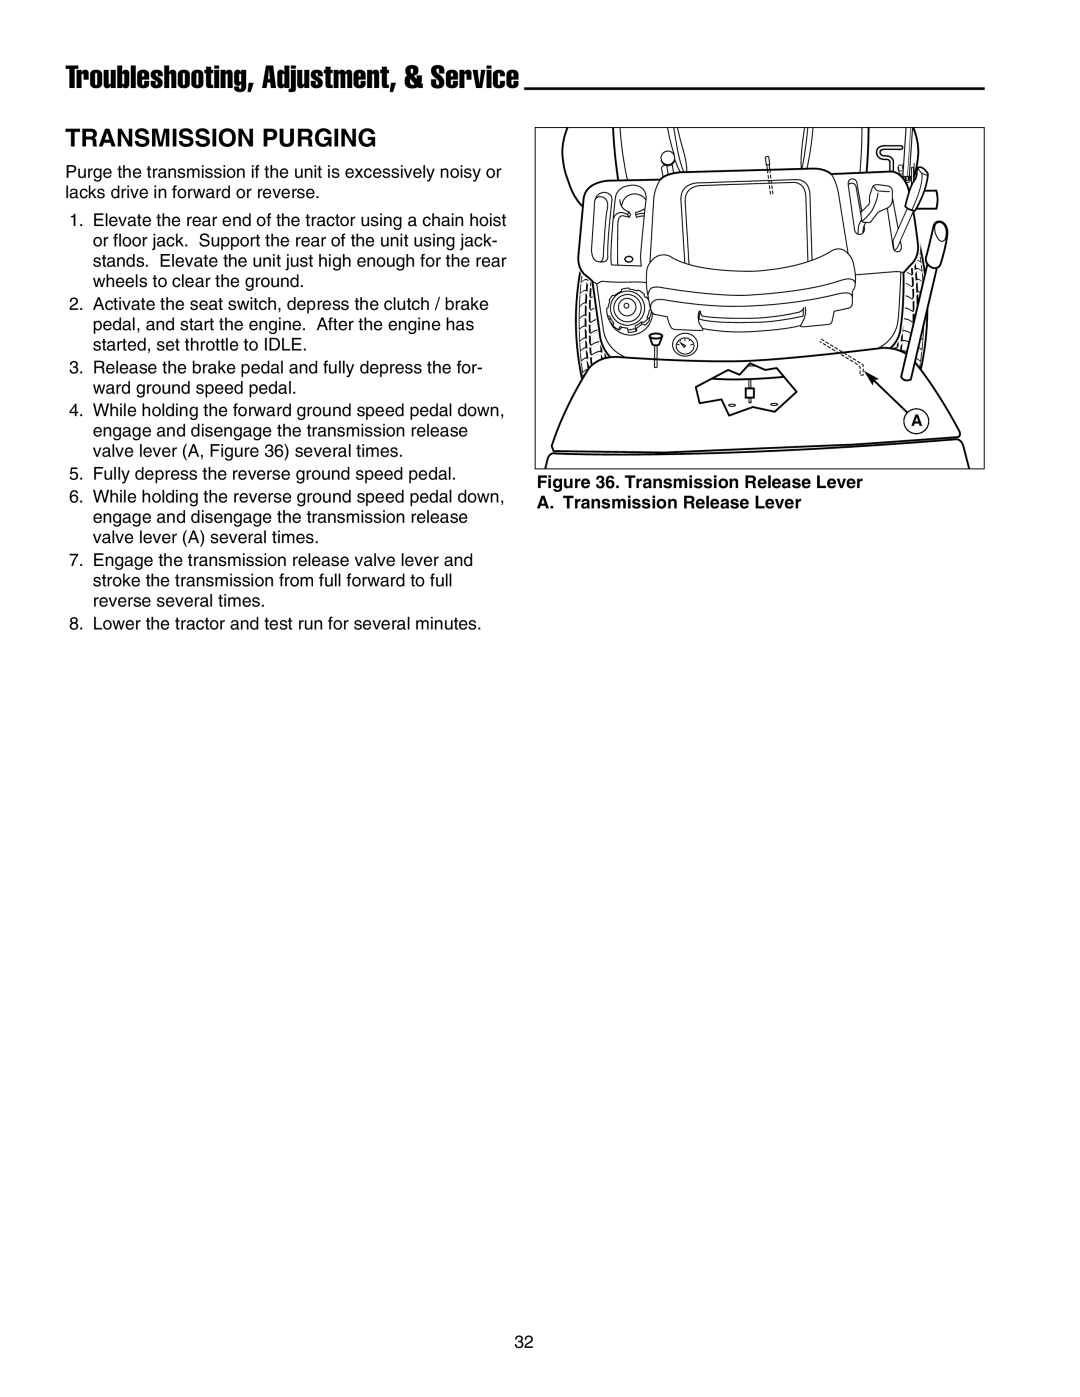 Snapper XL Series manual Transmission Purging, Troubleshooting, Adjustment, & Service 